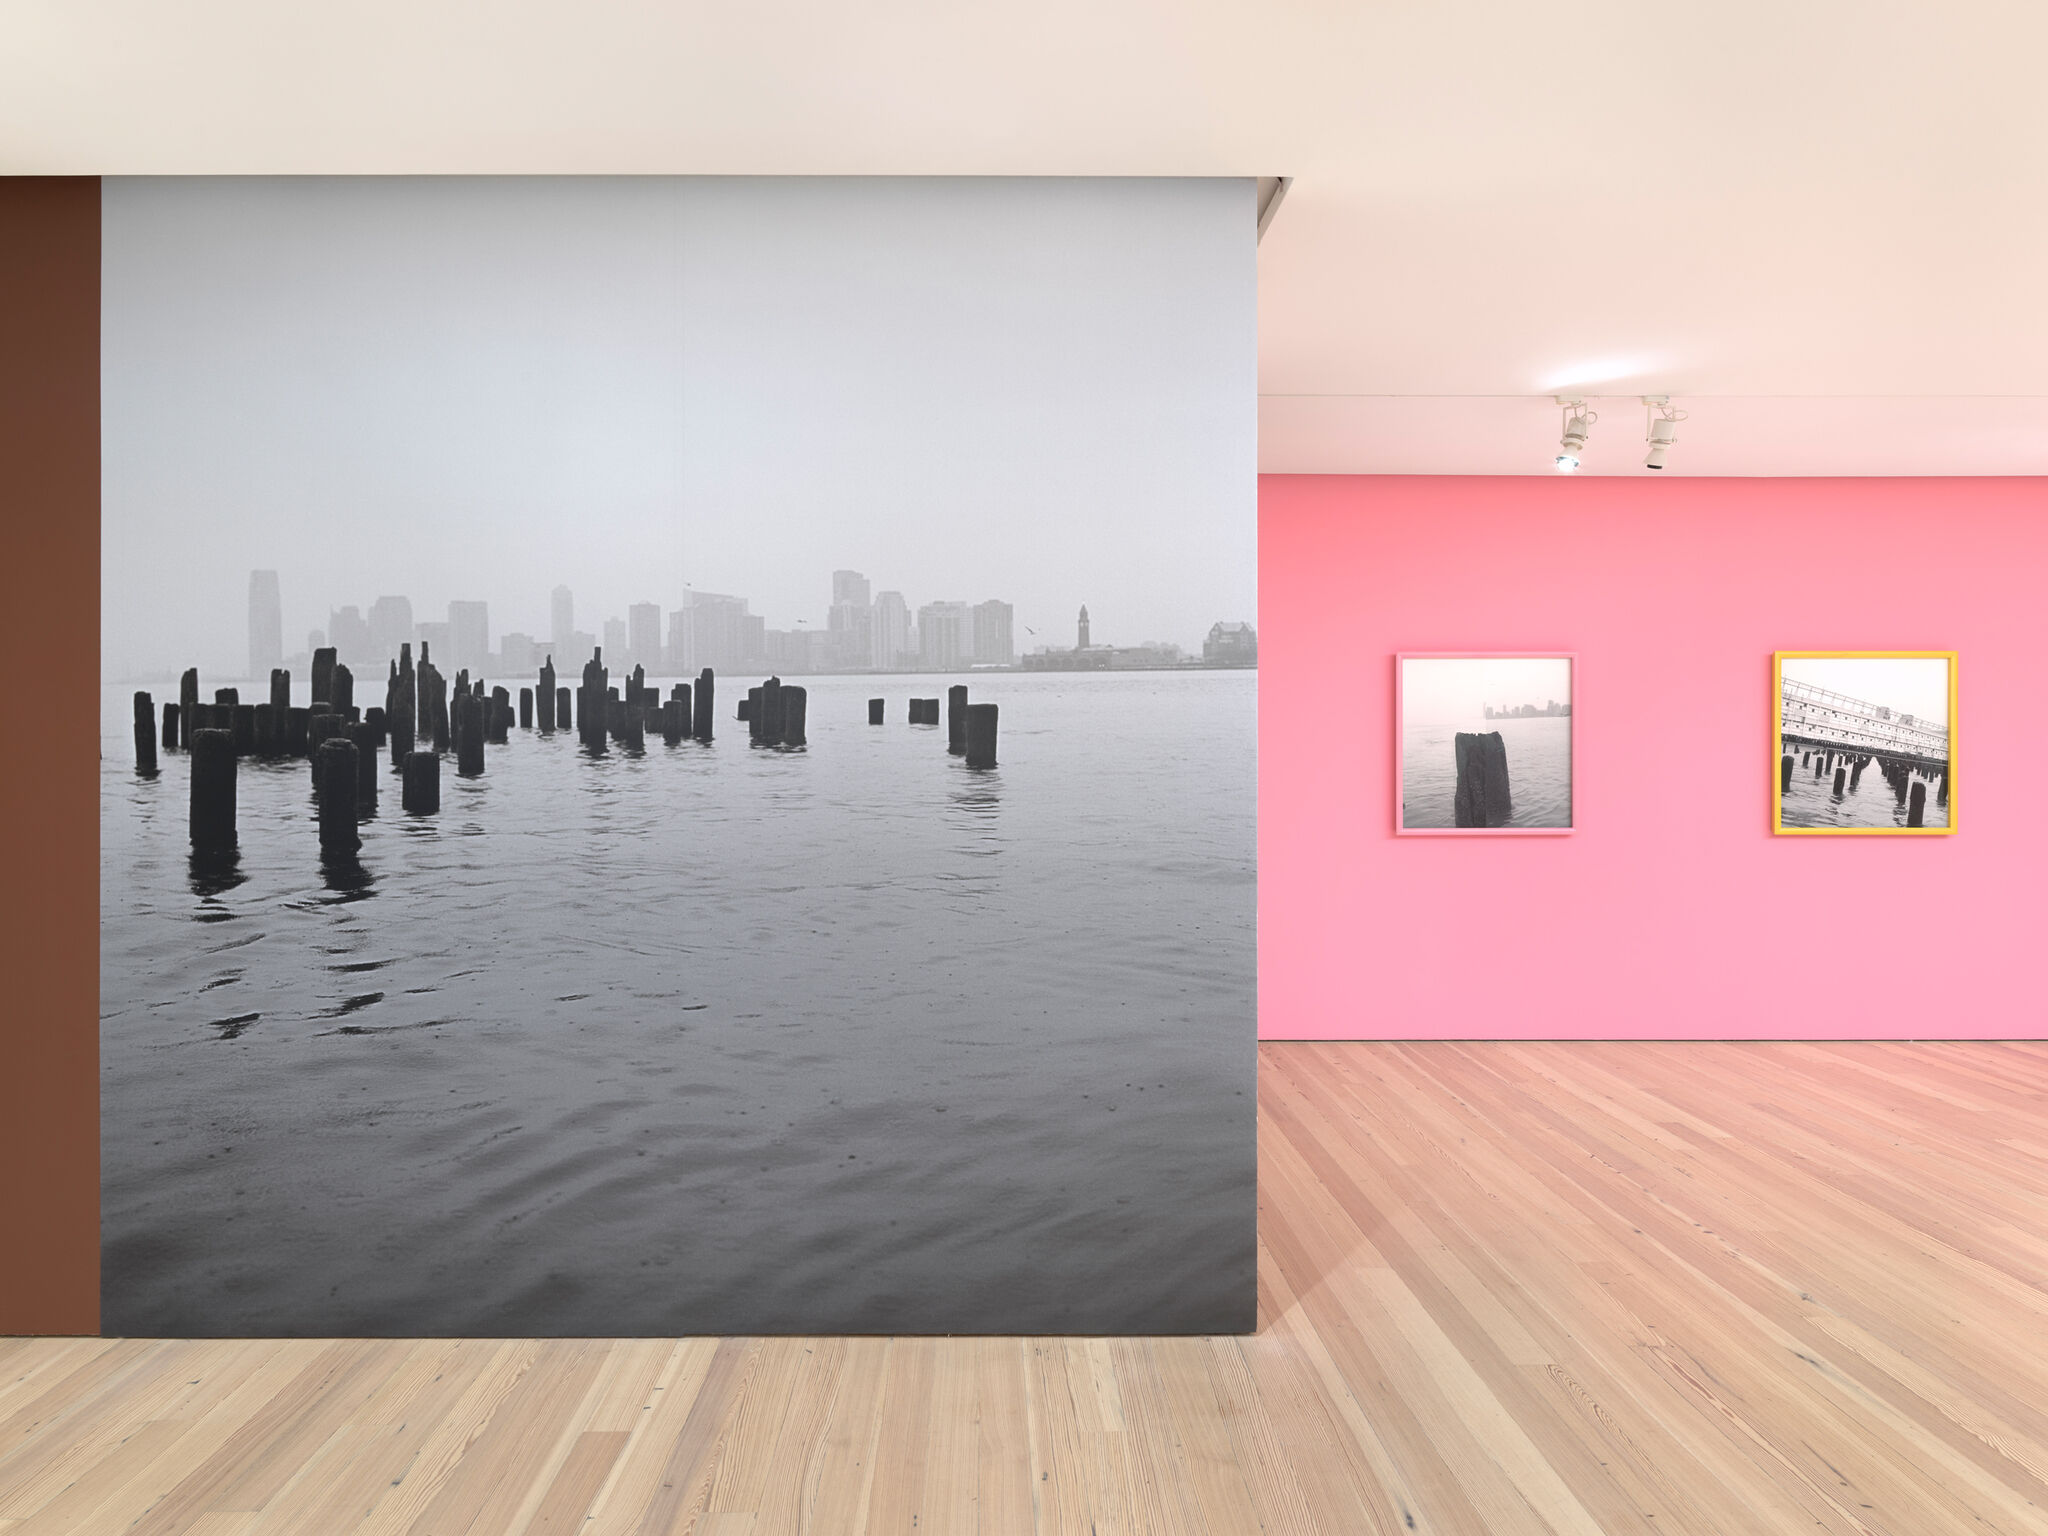 Black and white image of the Hudson River taking up a full gallery wall, next to a pink wall with two balck and white images.